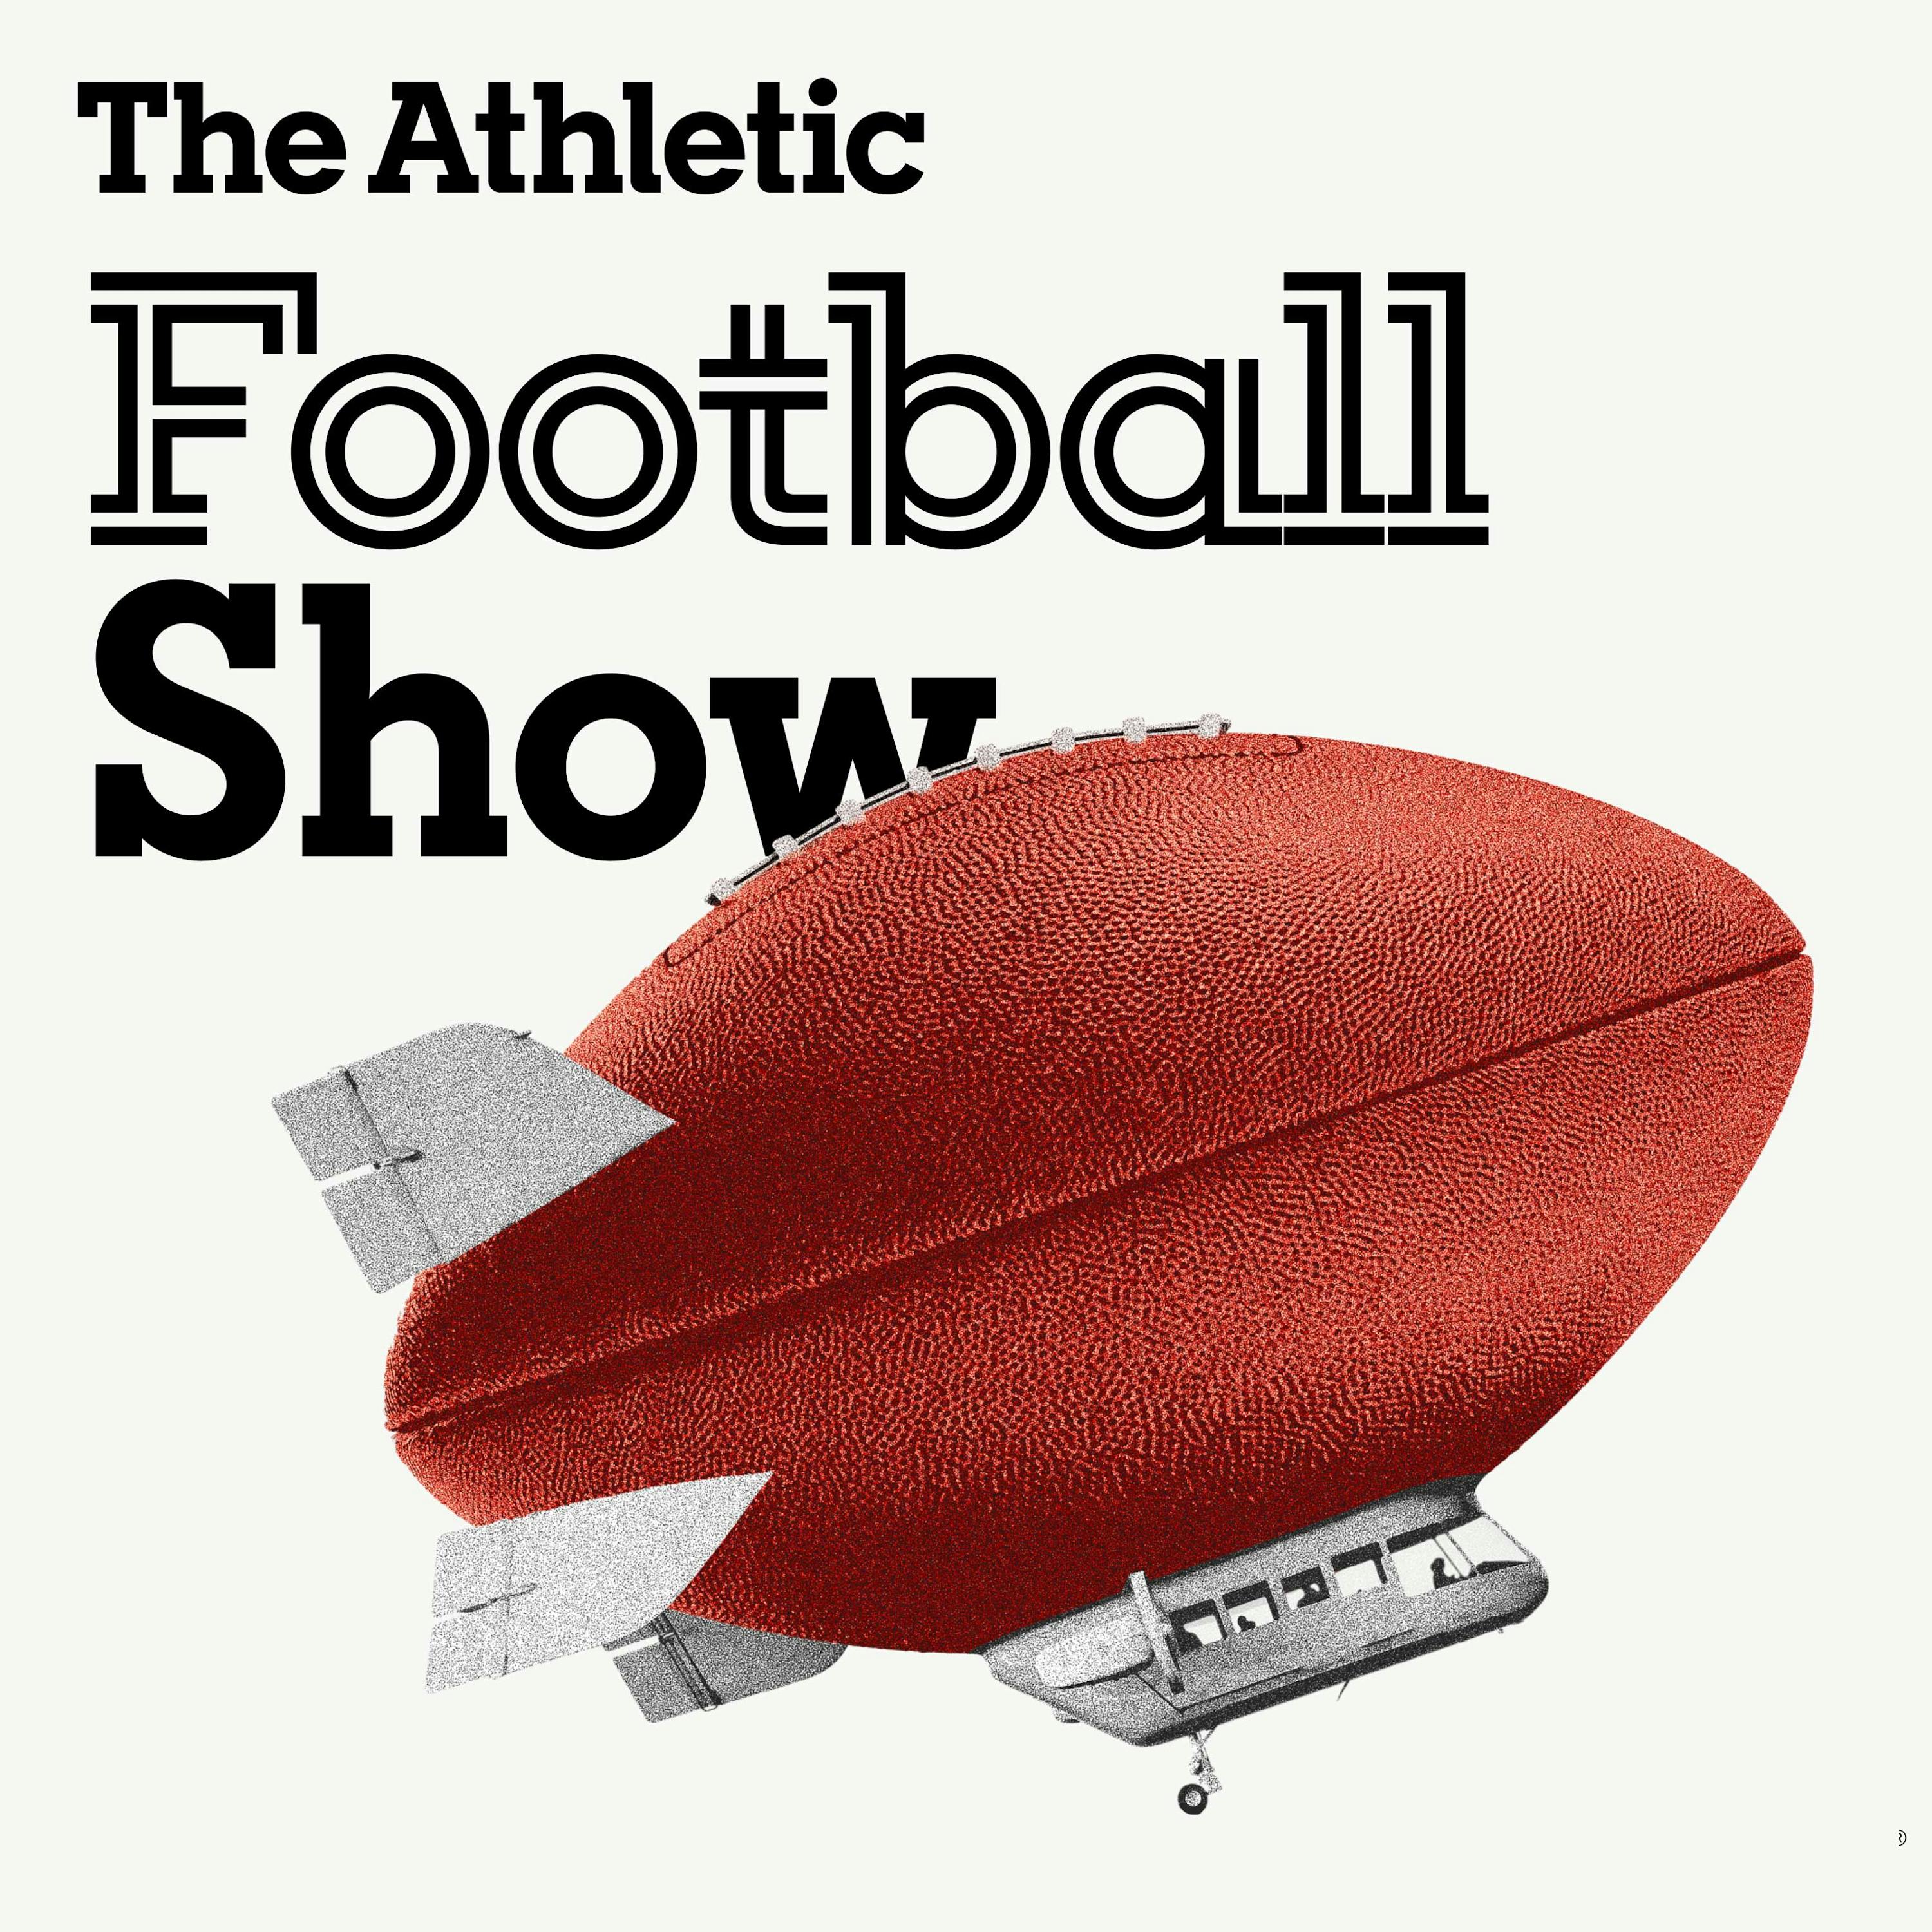 The Athletic Football Show podcast